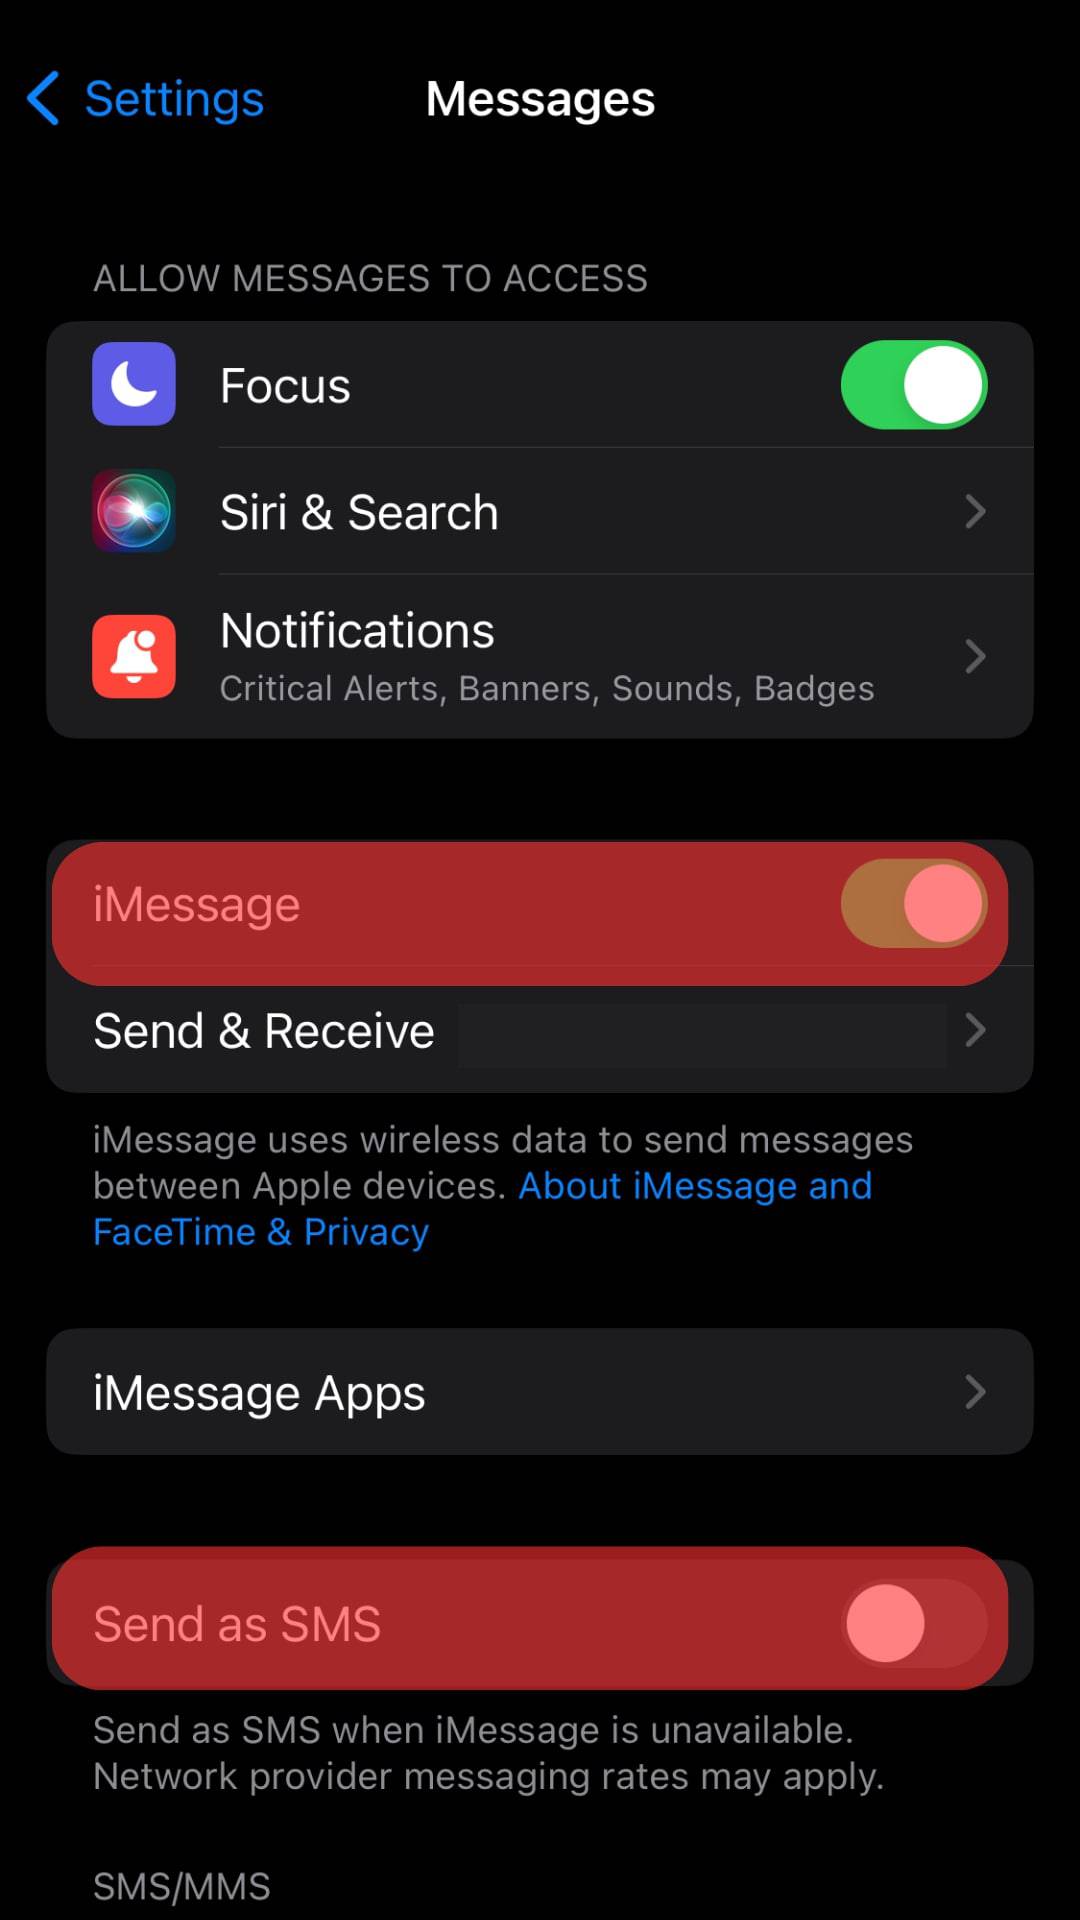 Toggle Off The Imessage And Enable The Send As Sms Option.